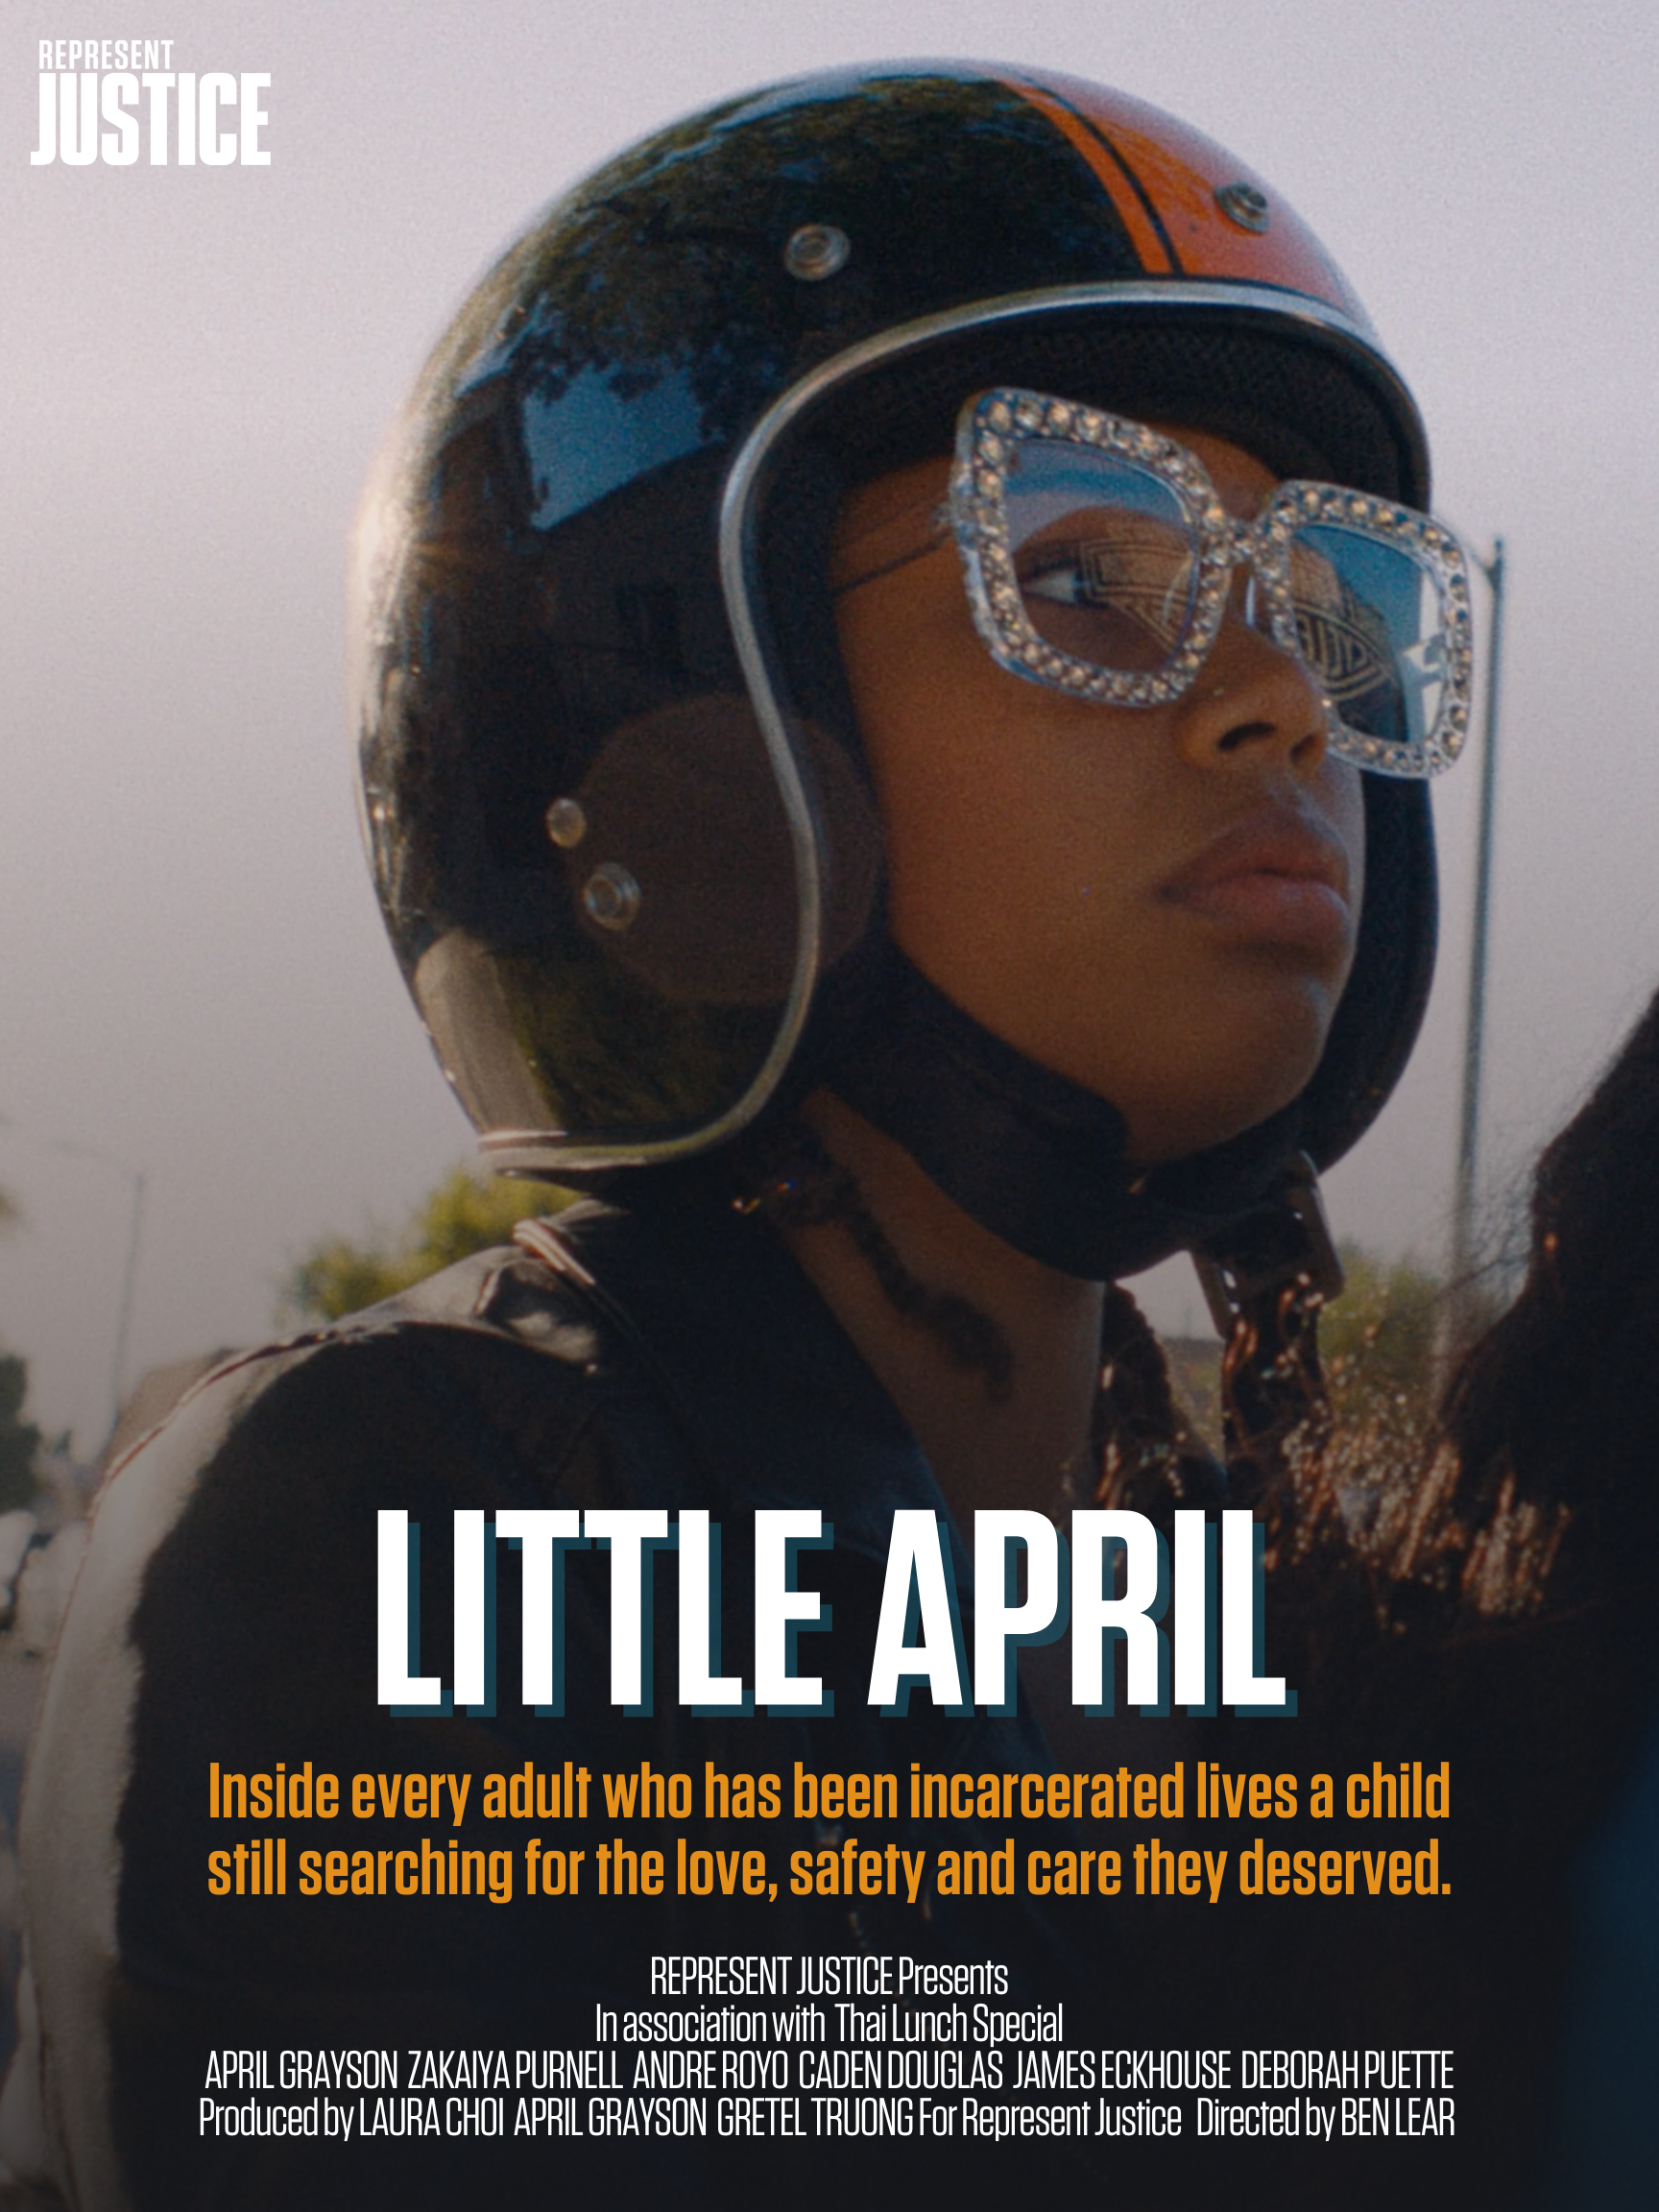 dana puckett recommends Who Is Little April